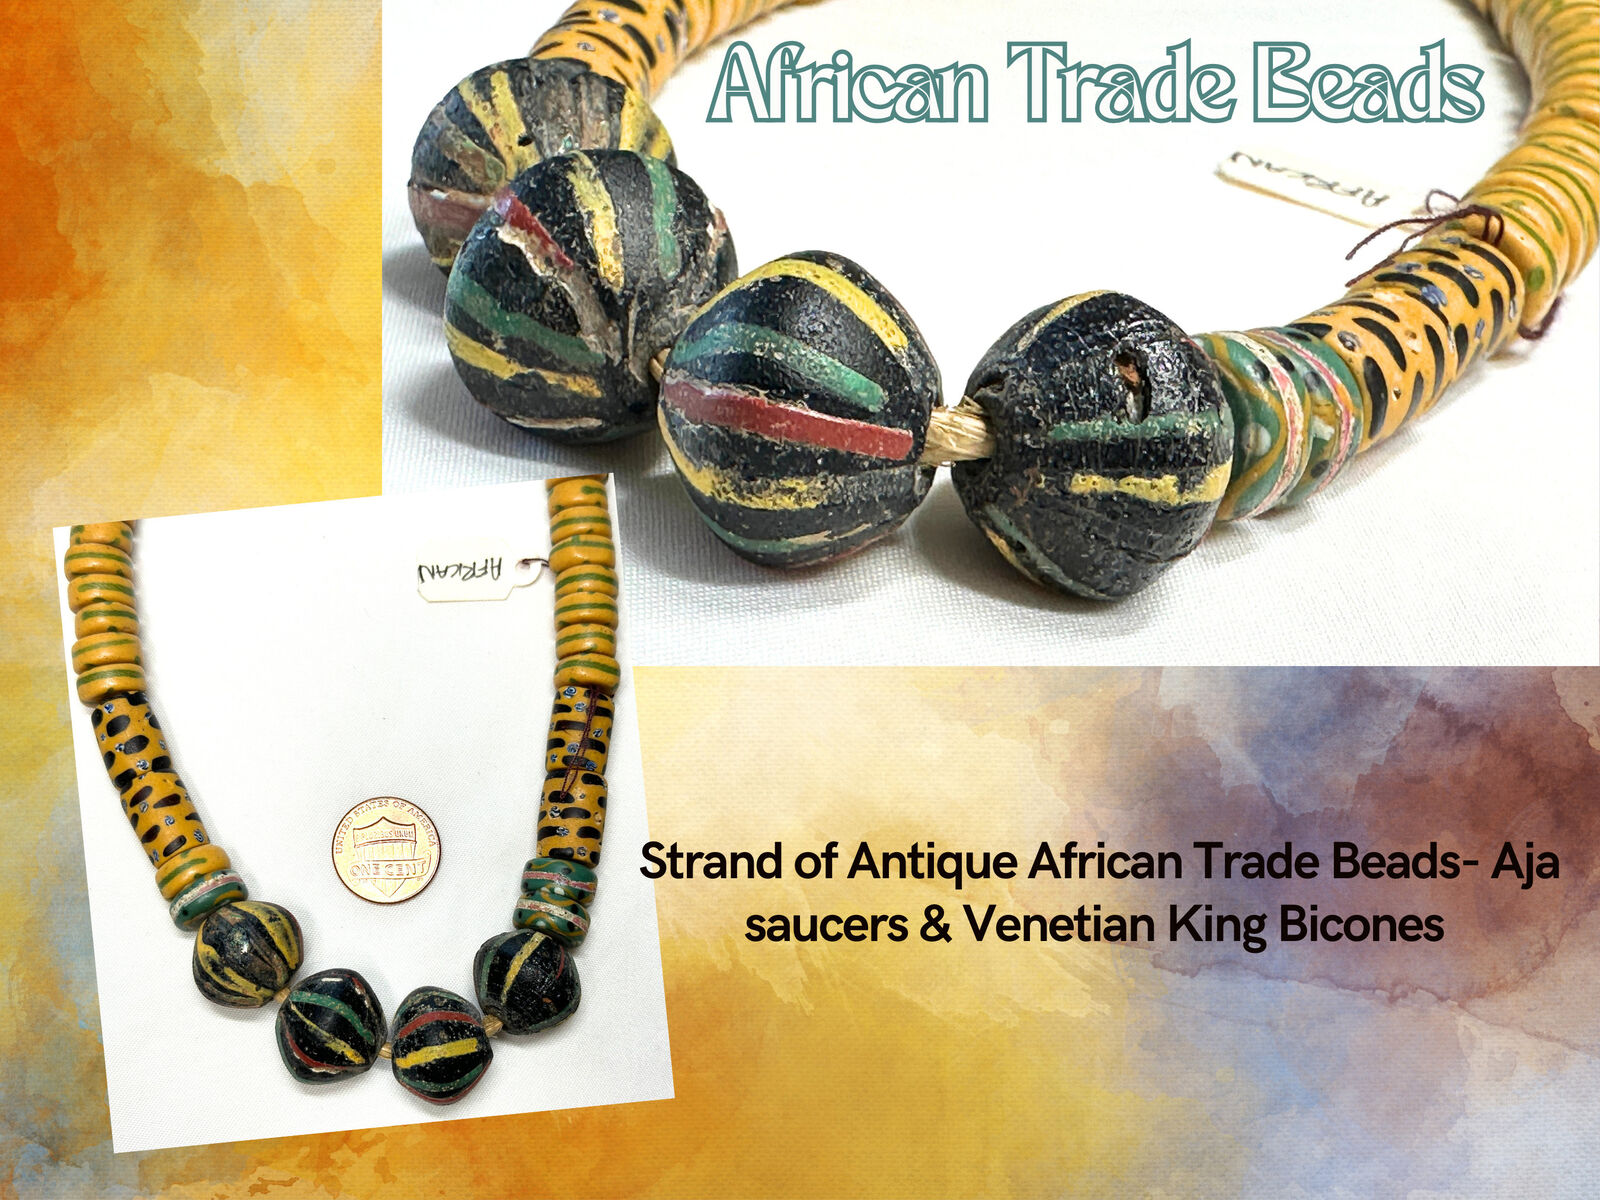 Strand Of Antique African Trade beads - Aja Saucers & Venetian King Bicones